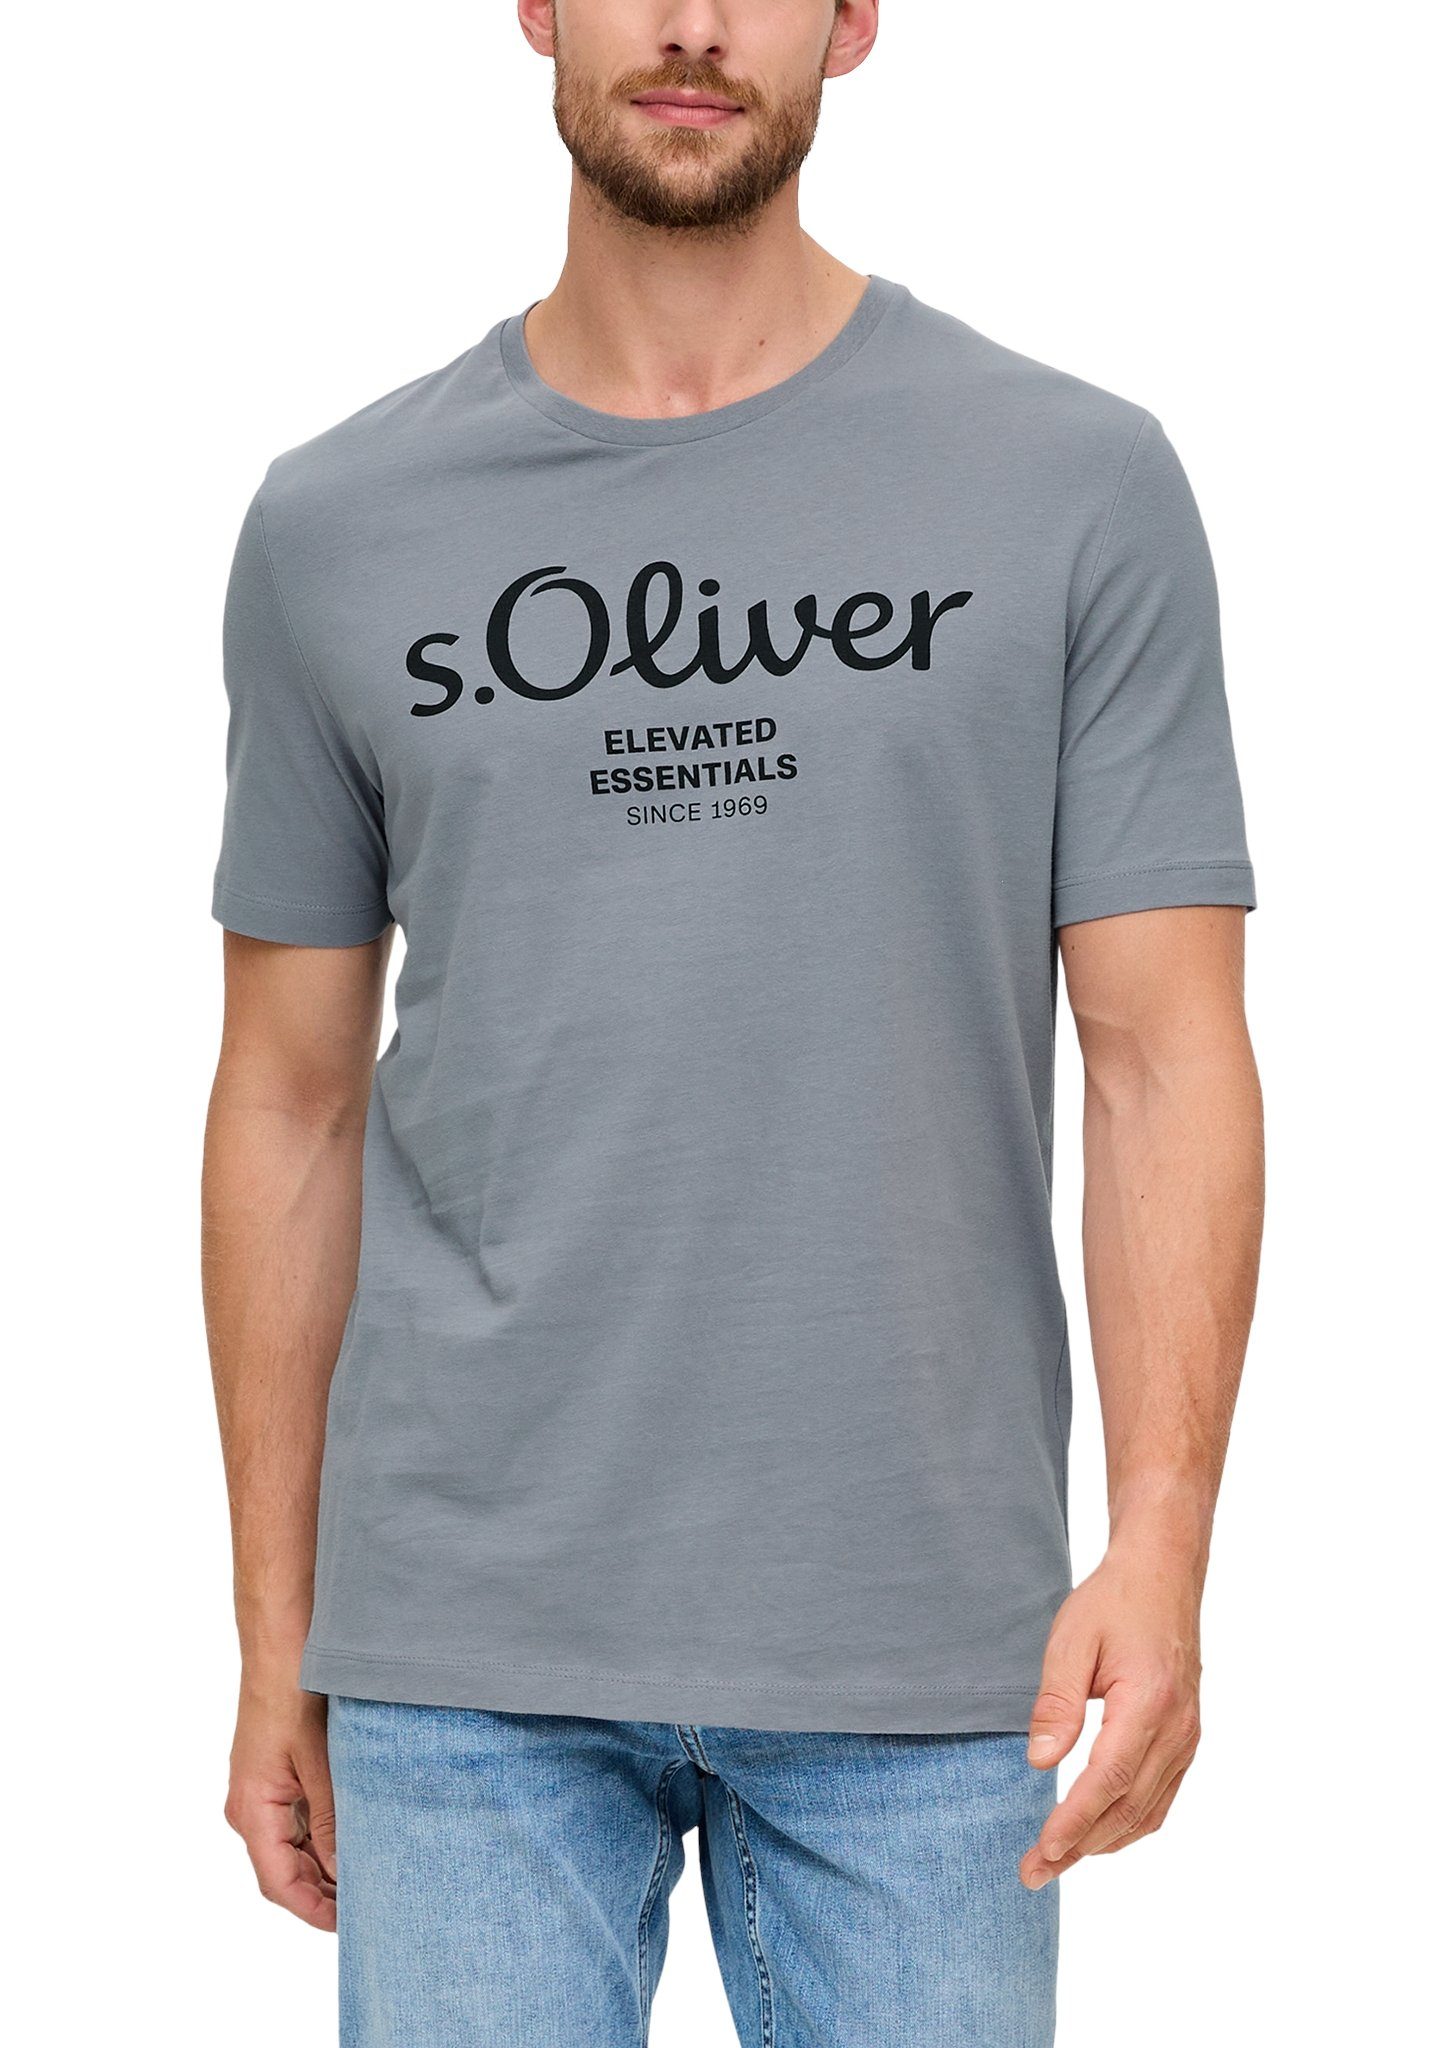 s.Oliver T-Shirt im sportiven mid grey Look